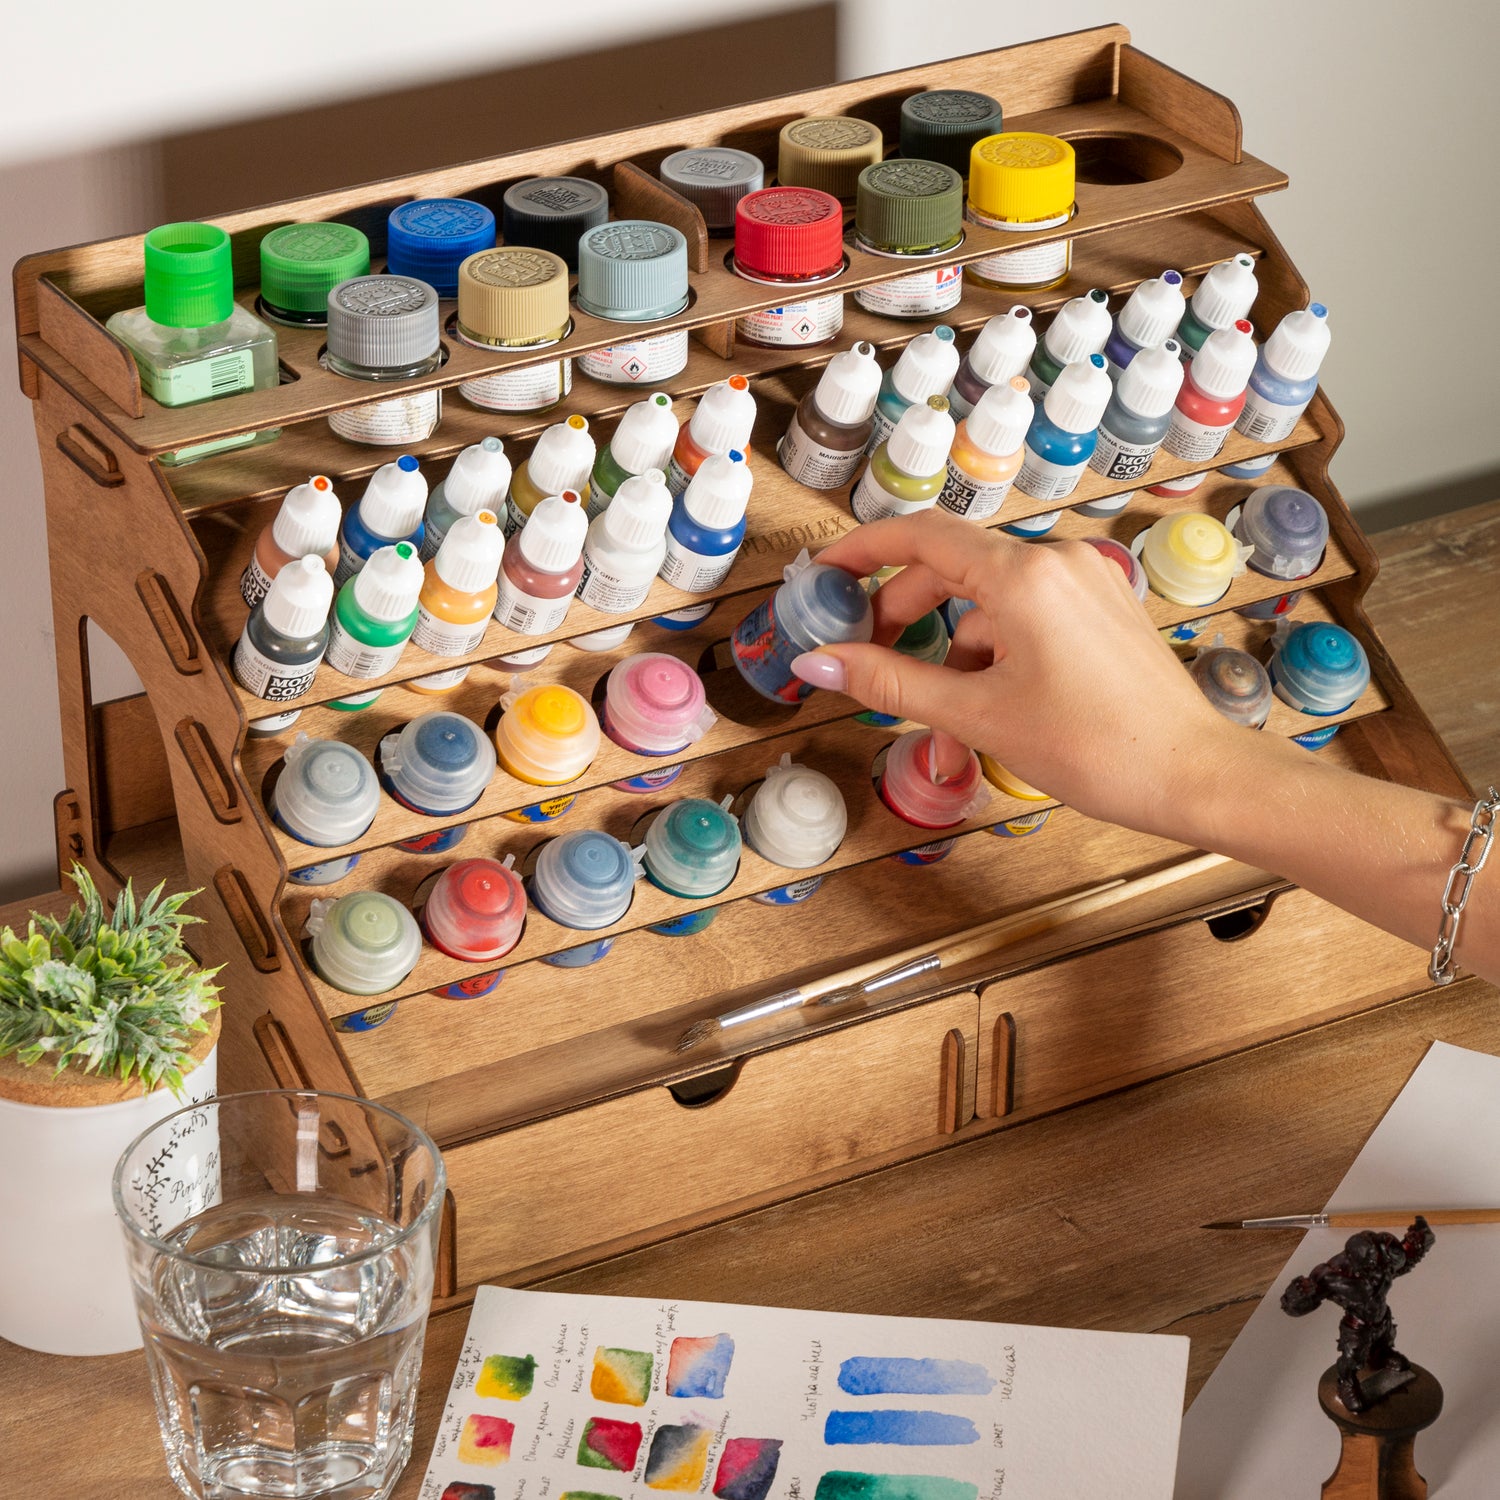 PLYDOLEX Wooden Paint Organizer for 74 Bottles of Paints and 14